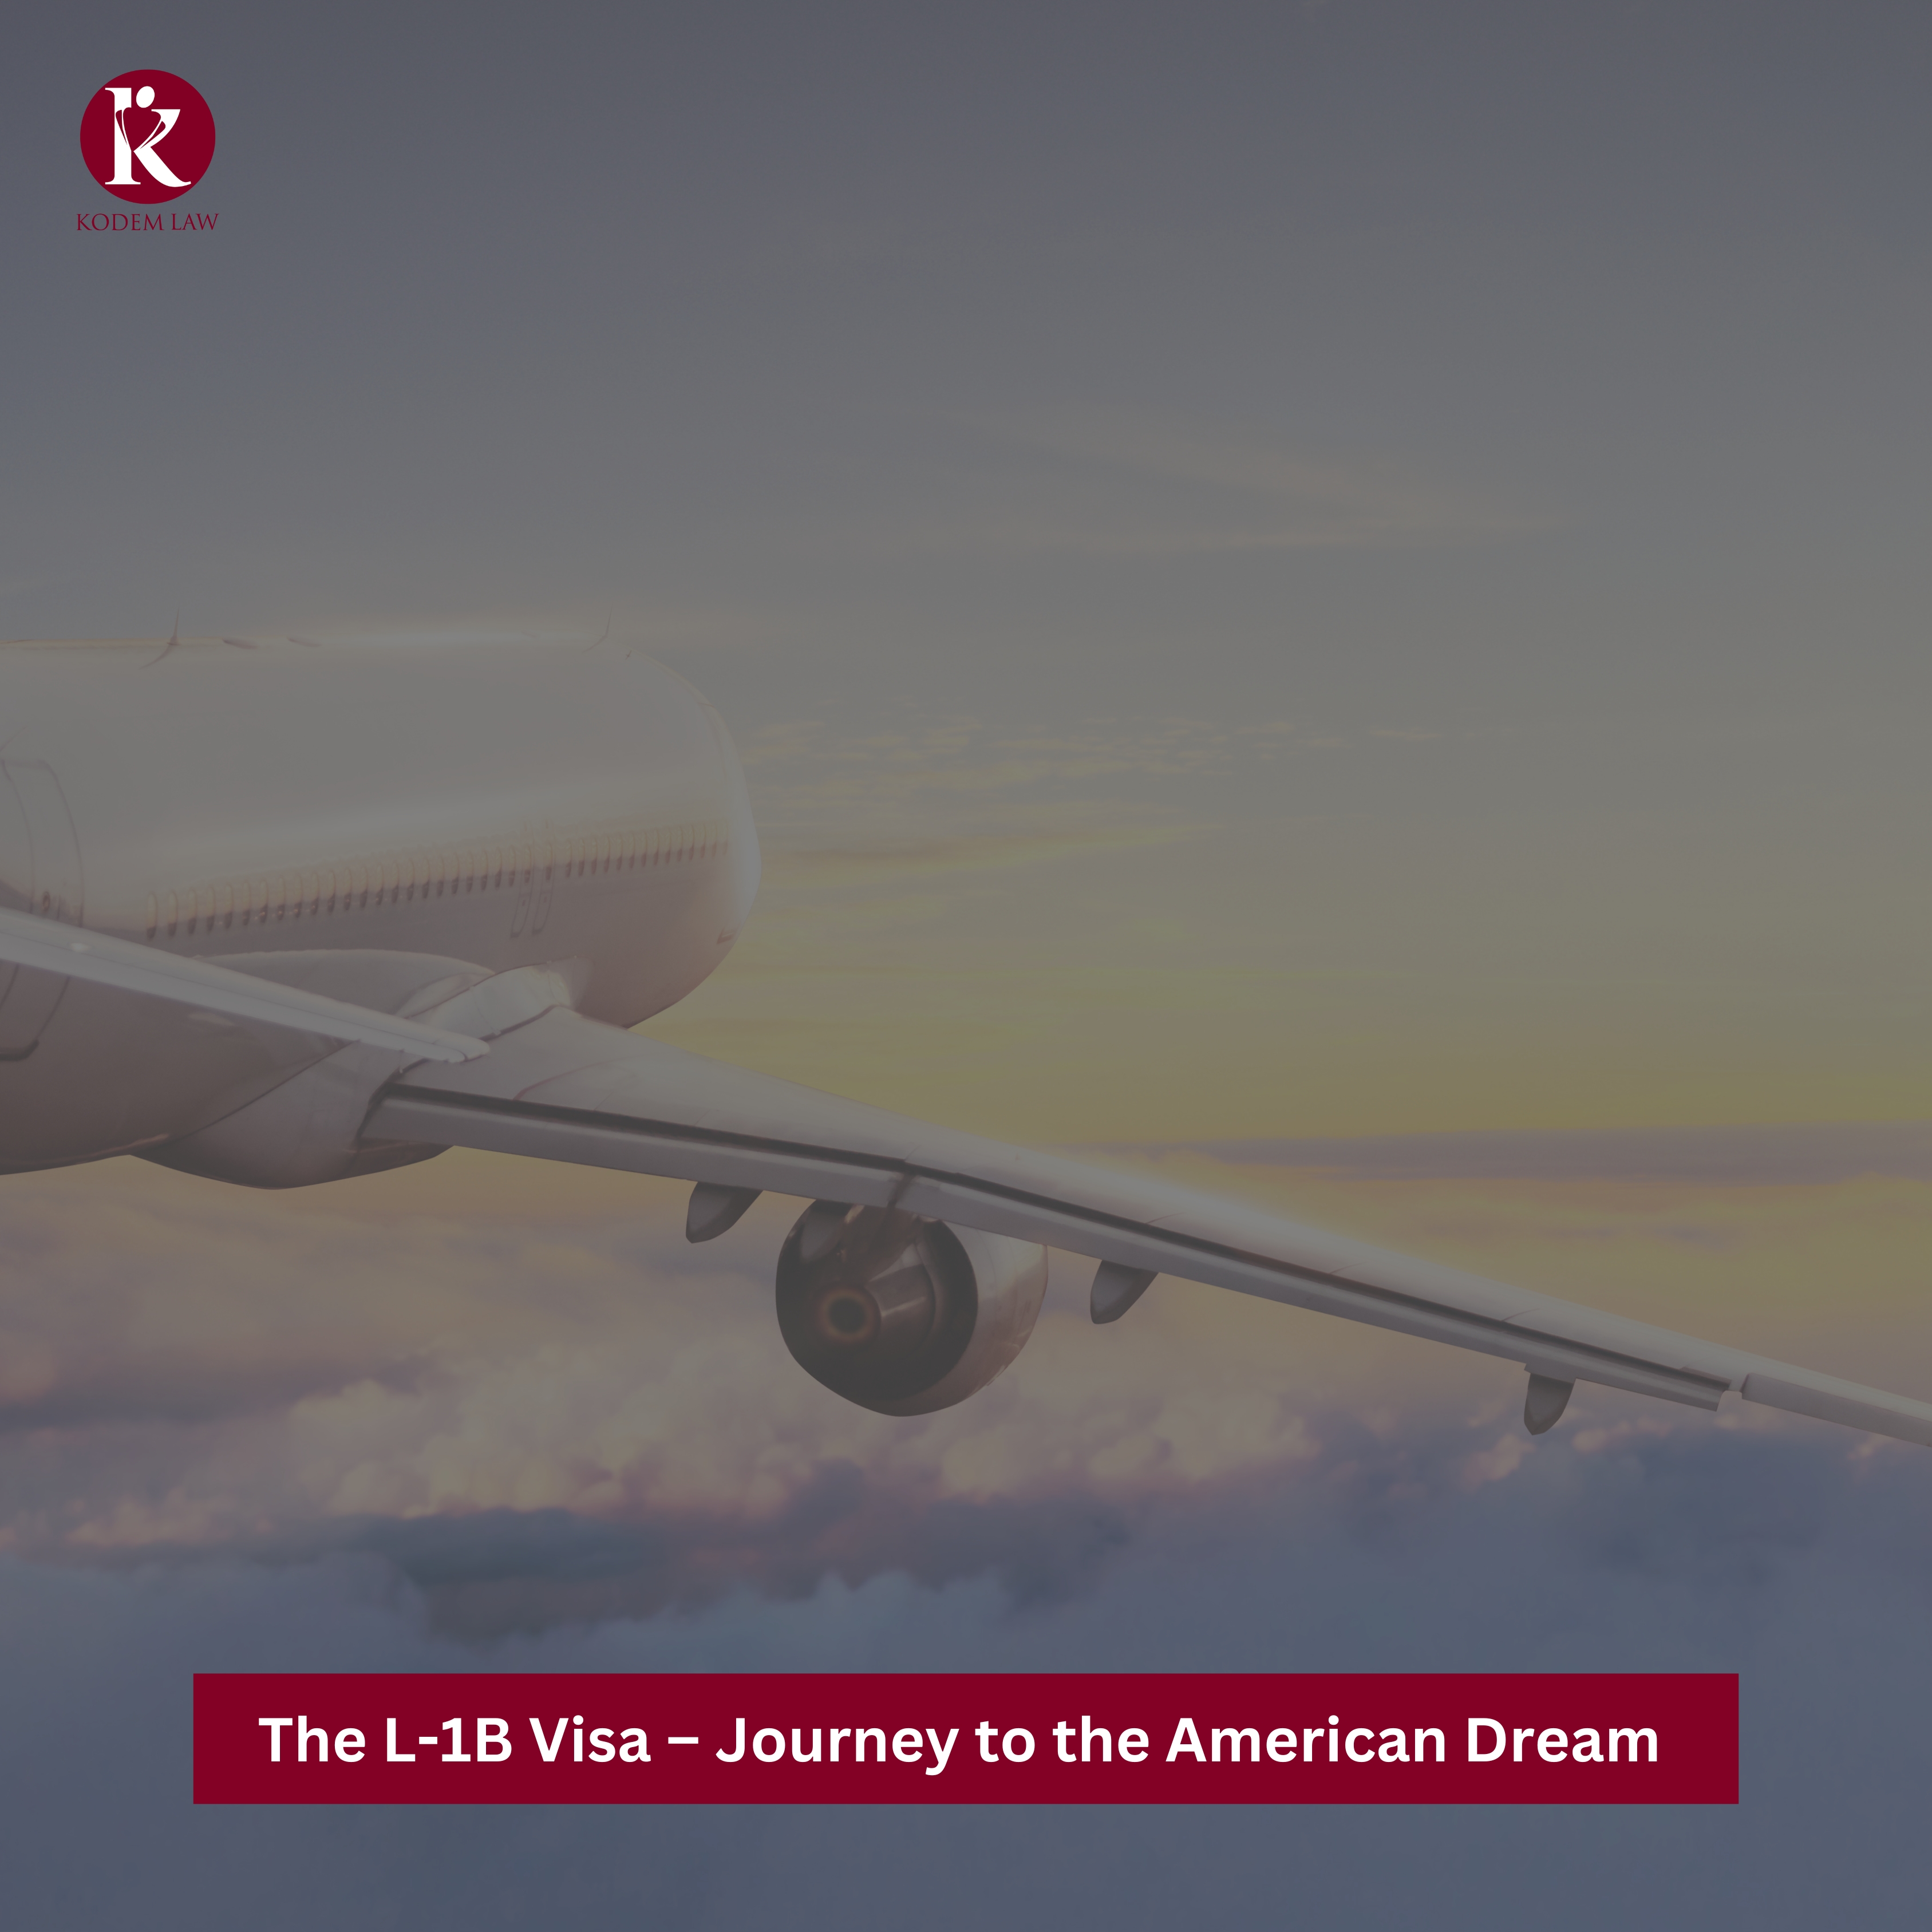 The L-1B Visa - Journey to the American Dream